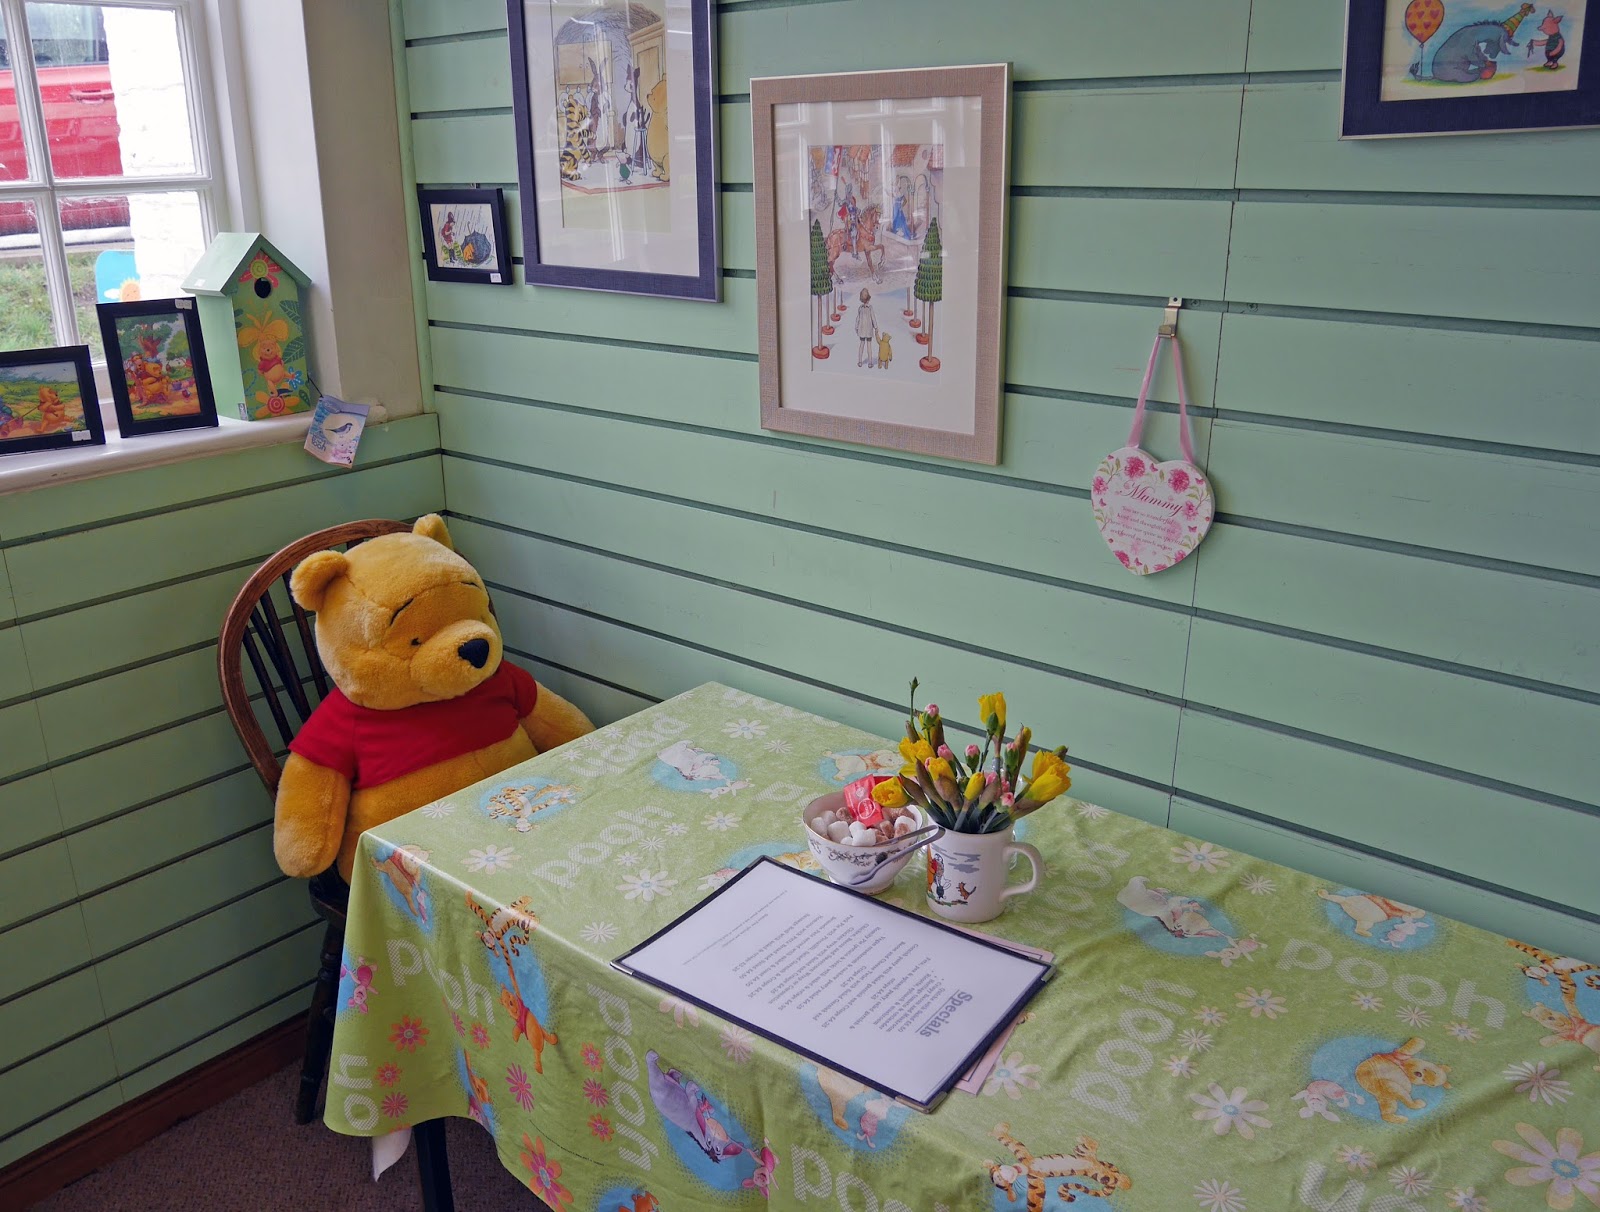 Winnie the Pooh merchandise at the Pooh Corner gift shop in Hartfield, East Sussex